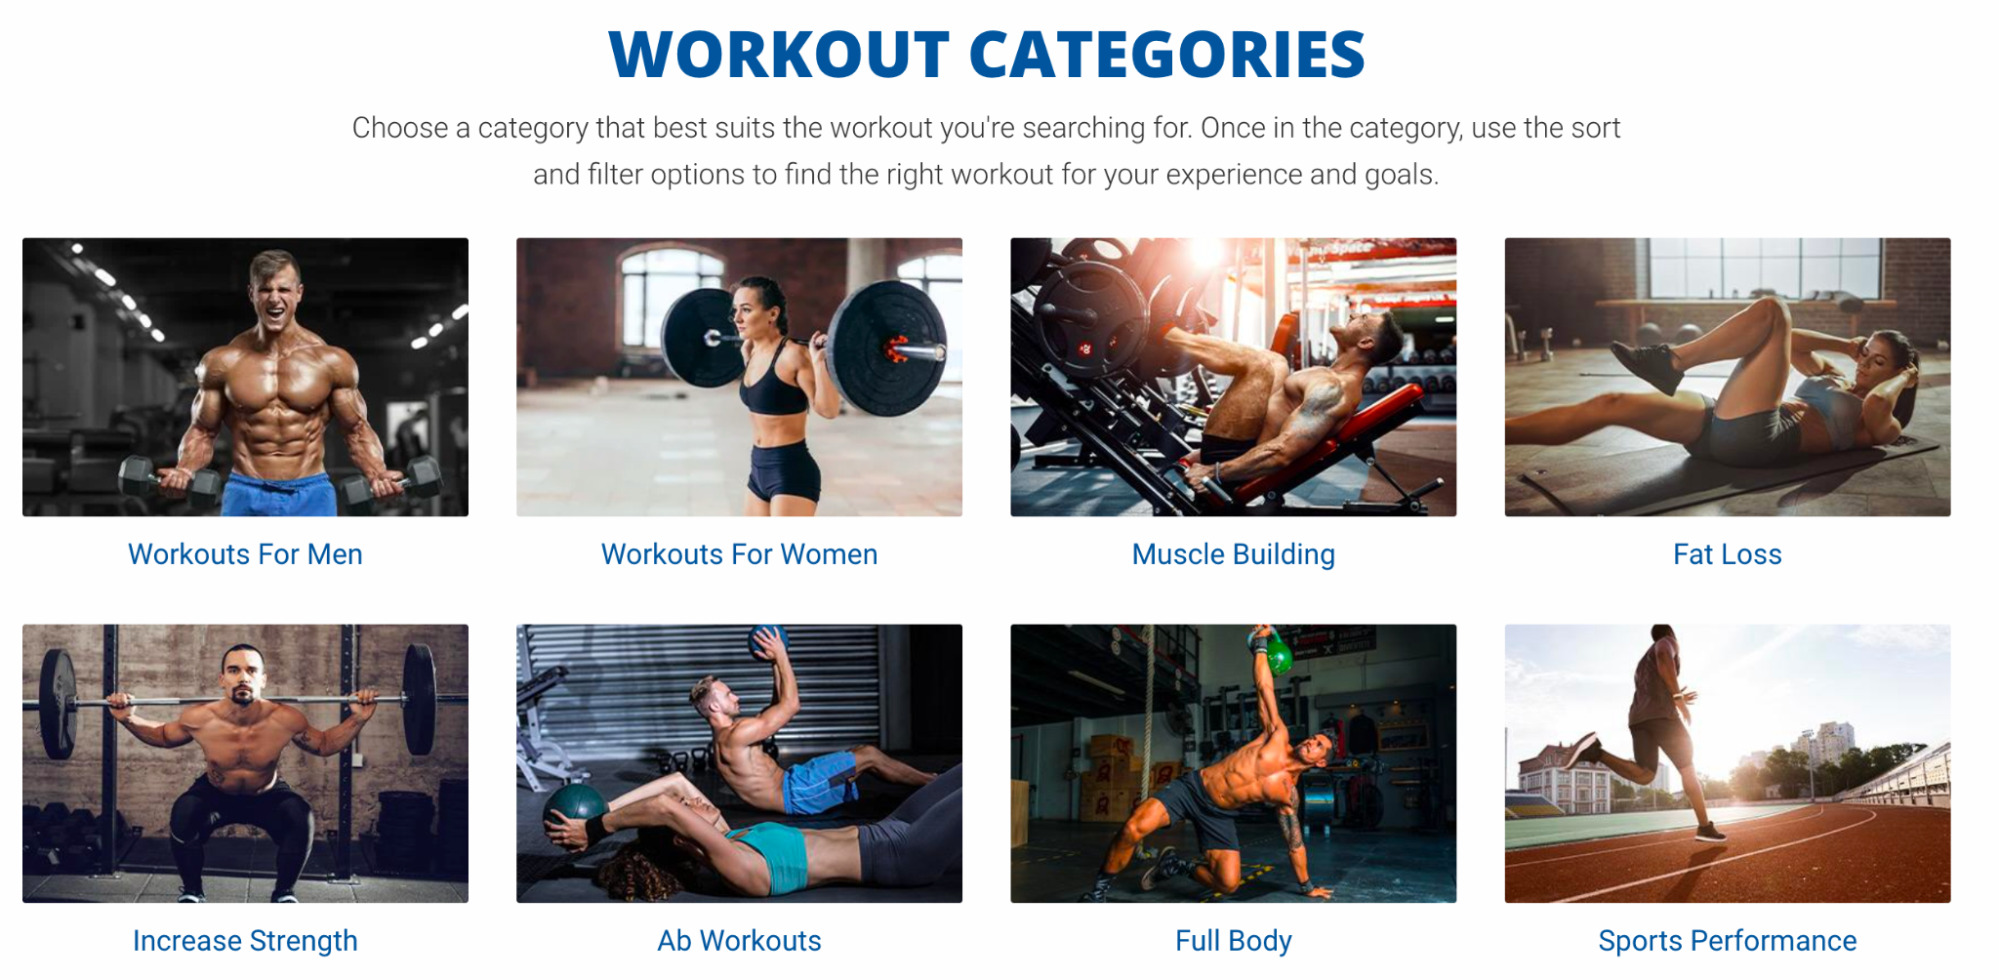 Workout categories (in grid format)
